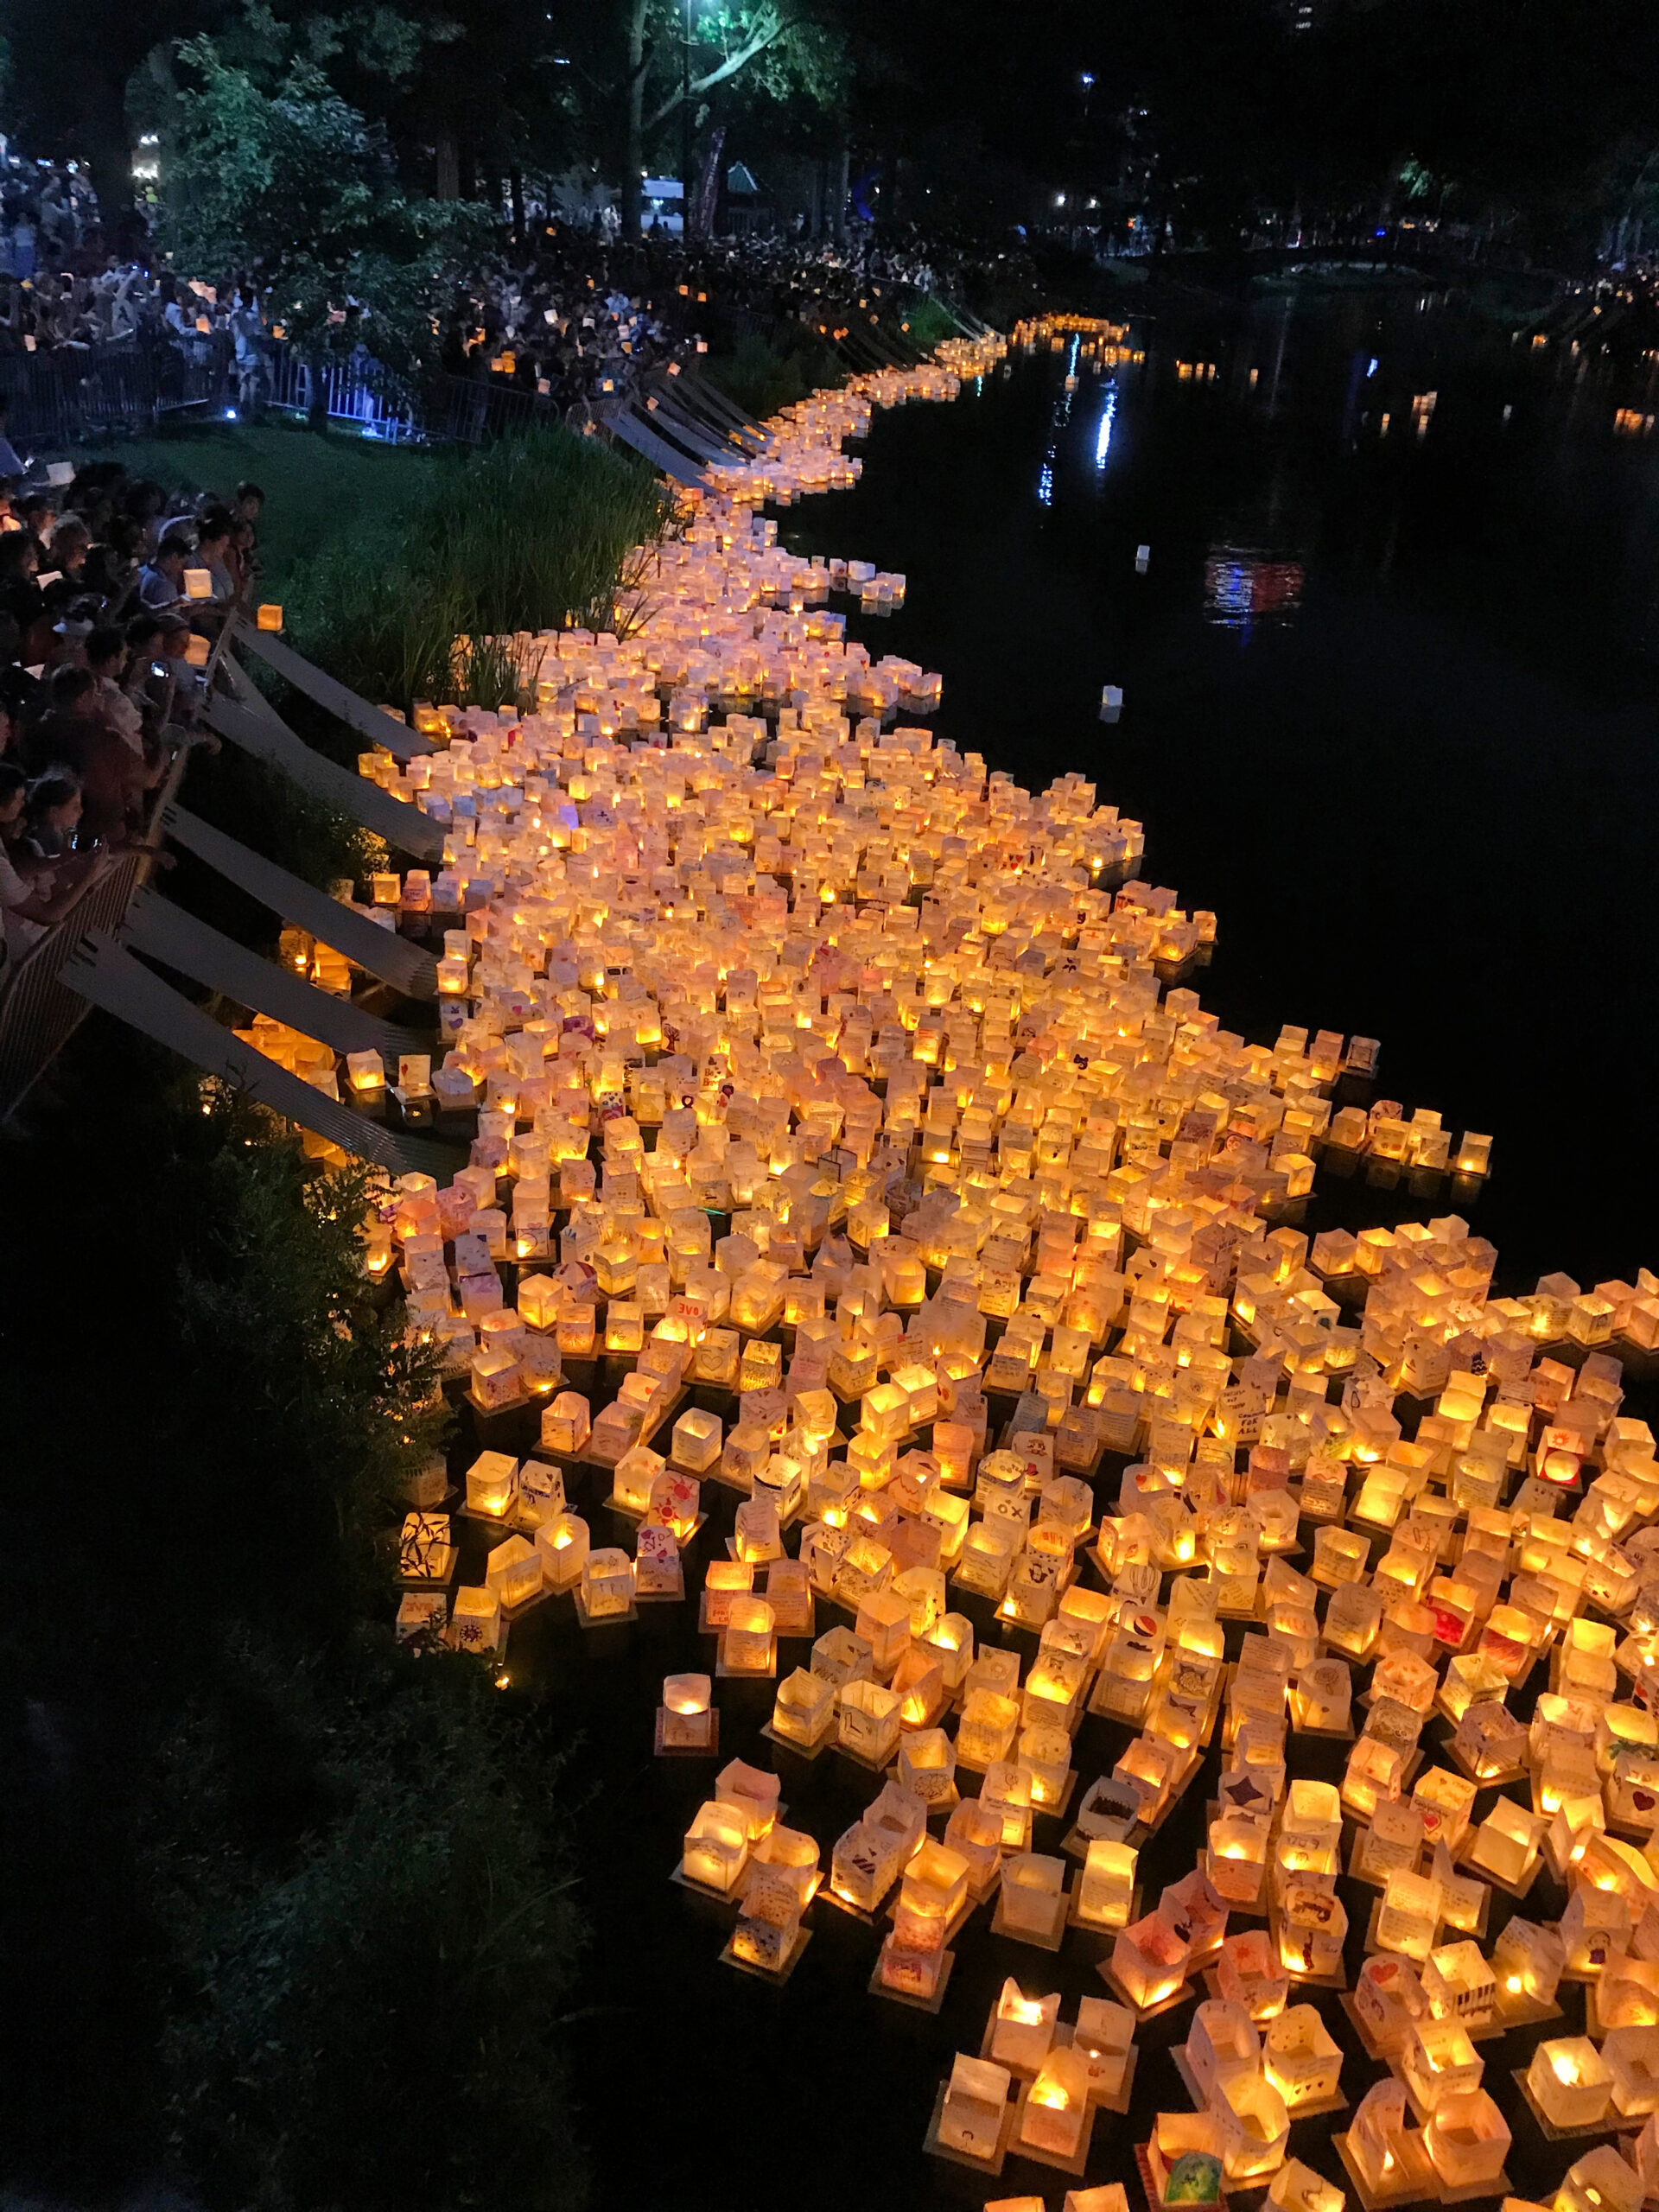 The Wonder of the Water Lantern Festival In The Olive Groves